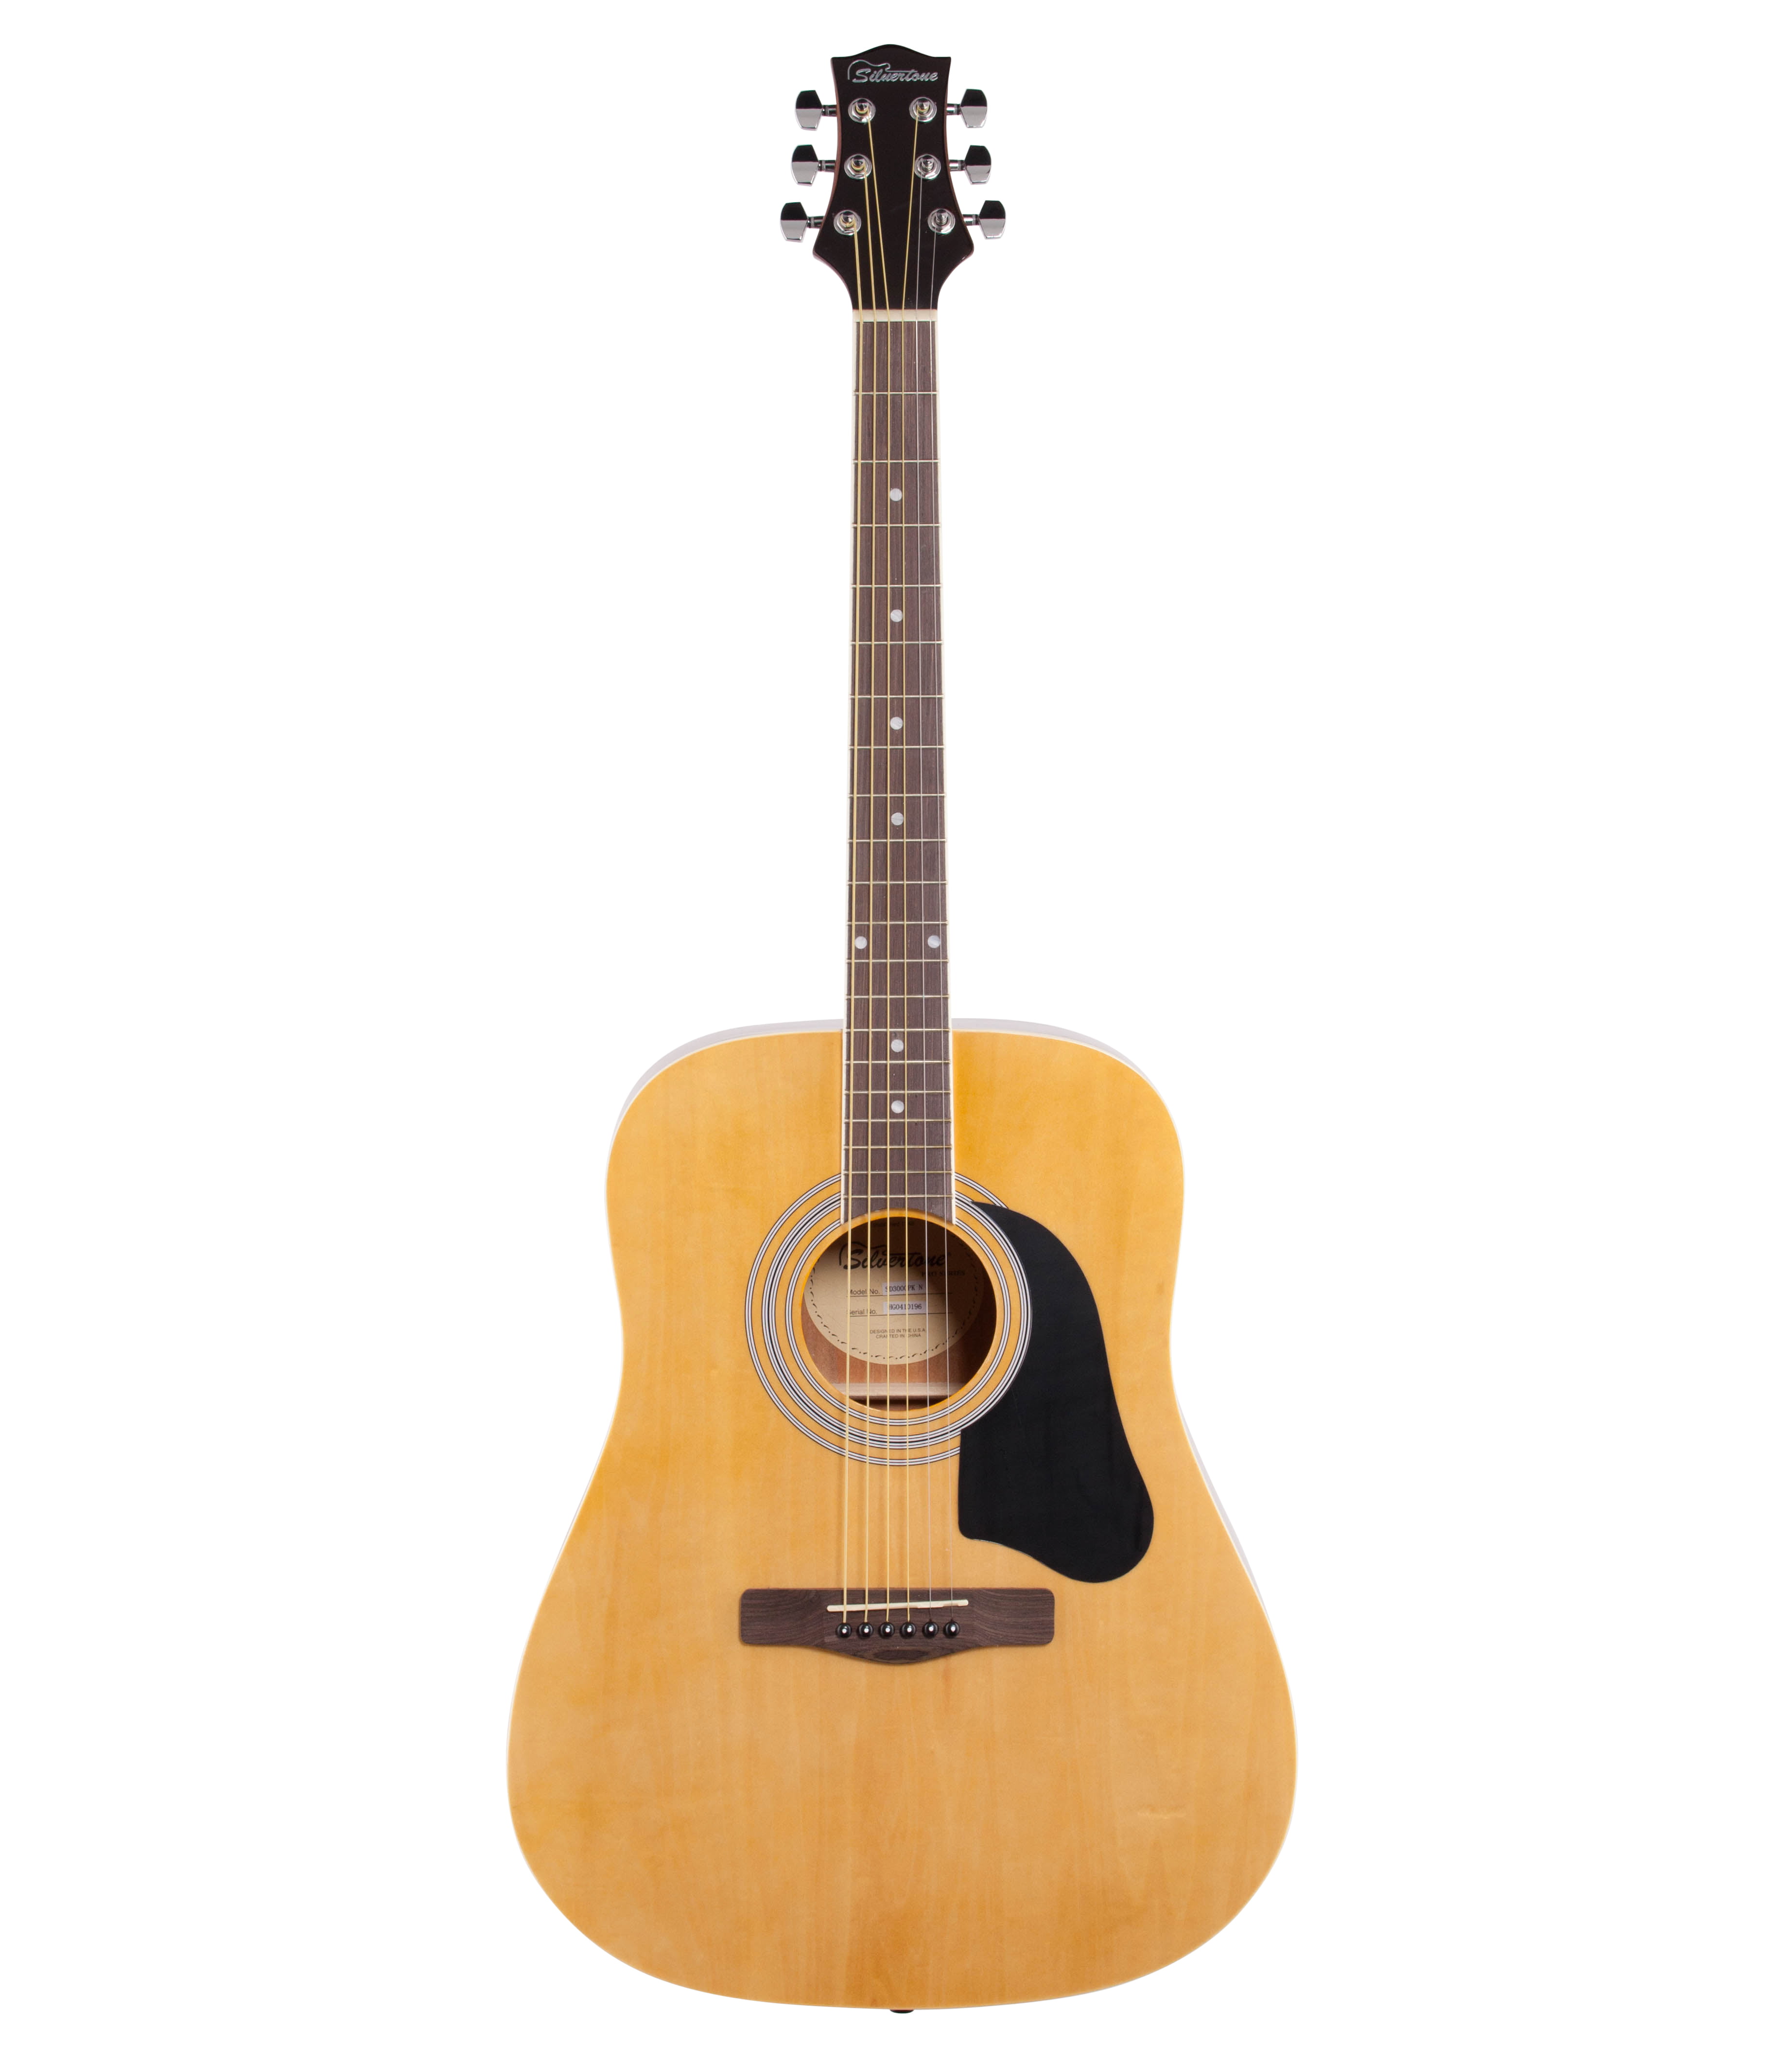 Silvertone SD3000 Natural Acoustic Guitar Package with Tuner, Gig Bag.  Guitar Strap. Strings, Picks and Chord Chart